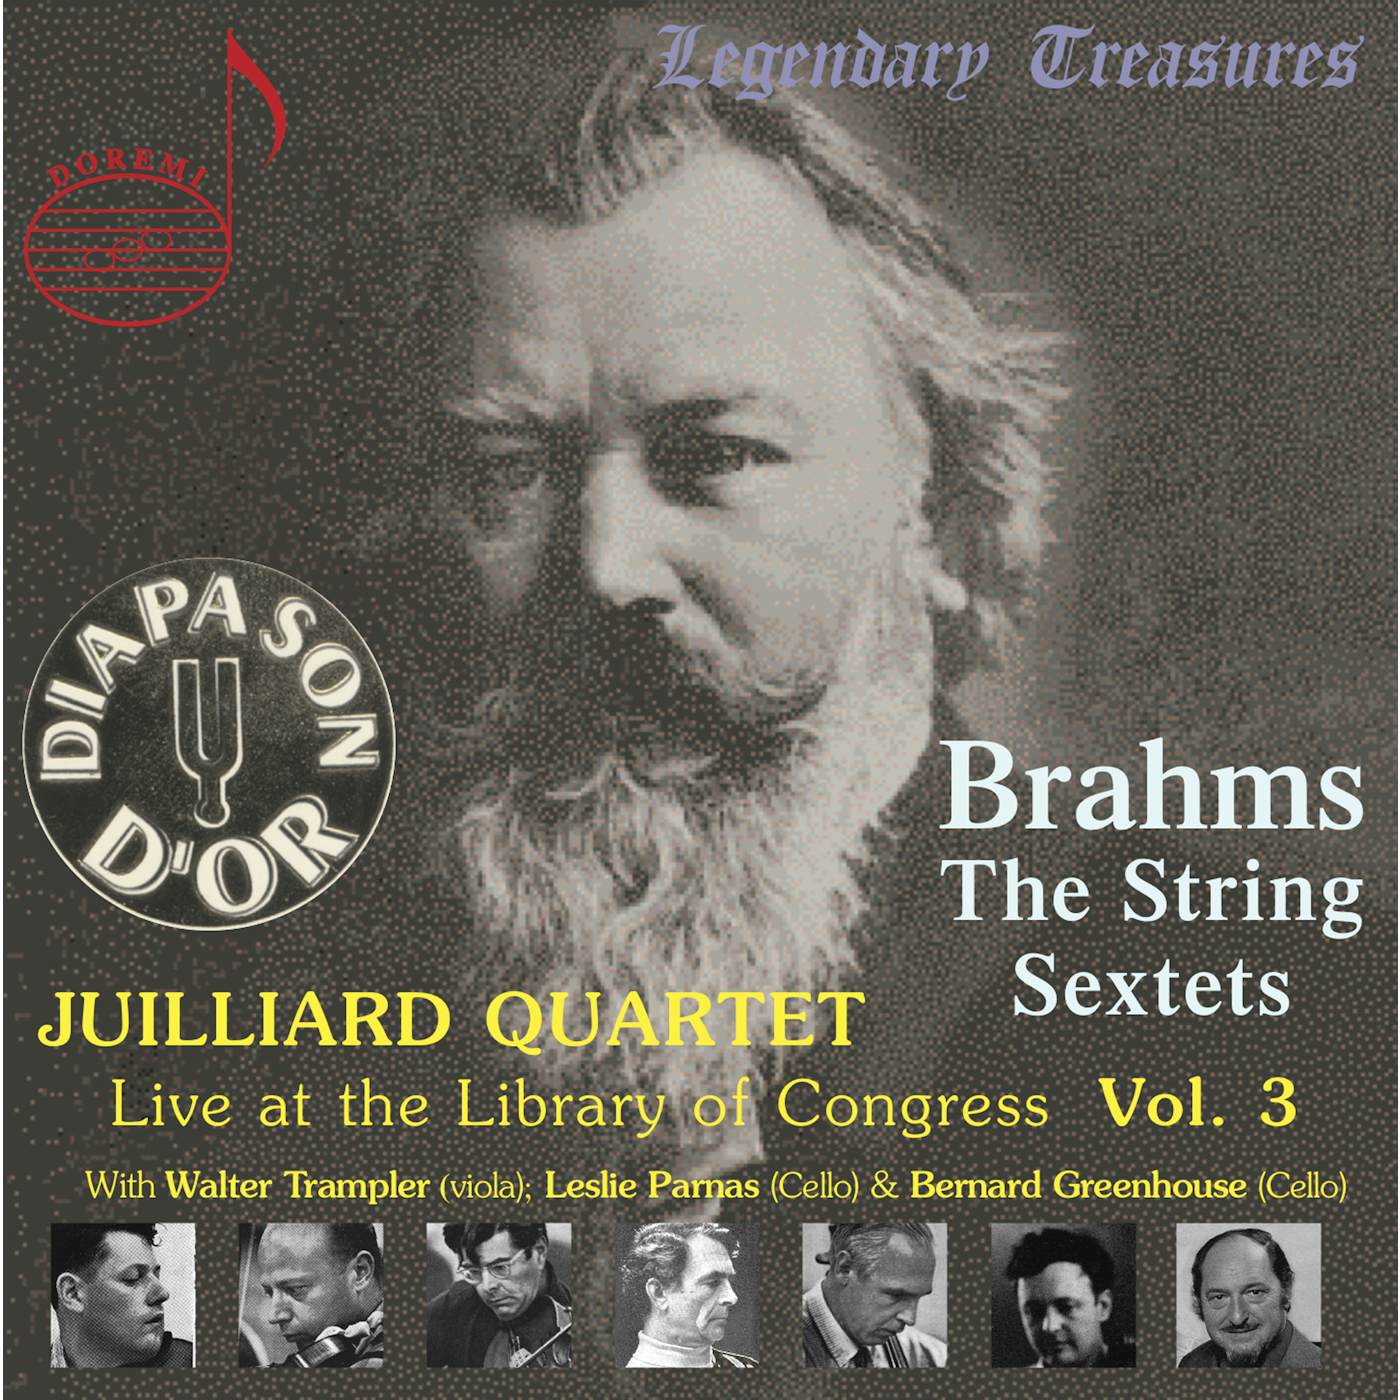 Juilliard String Quartet LIVE AT THE LIBRARY OF CONGRESS 3 CD